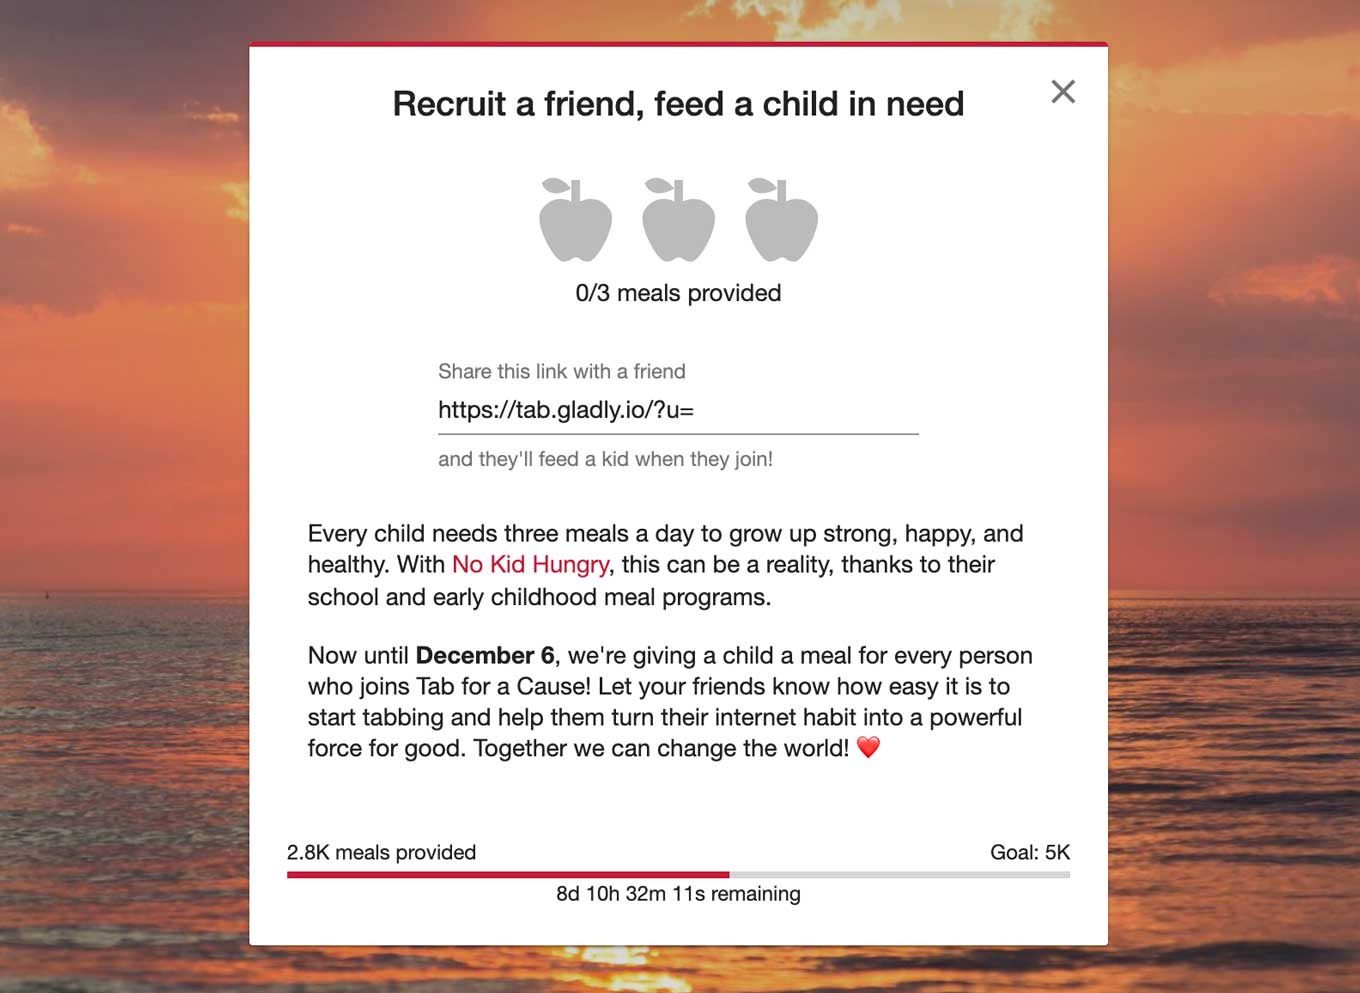 Tab for a Cause screenshot: Recruit a friend, feed a child in need - 0/3 meals provide - Share this link with a friend and they'll feed a kid when they join! | Every child needs three meals a day to grow up strong, happy, and healthy. With No Kid Hungry, this can be a reality, thanks to their school and early childhood meal programs. - Now until December 6, we're giving a child a meal for every person who joins Tab for a Cause! Let your friends know how easy it is to start tabbing and help them turn their internet habit into a powerful force for good. Together we can change the world! 